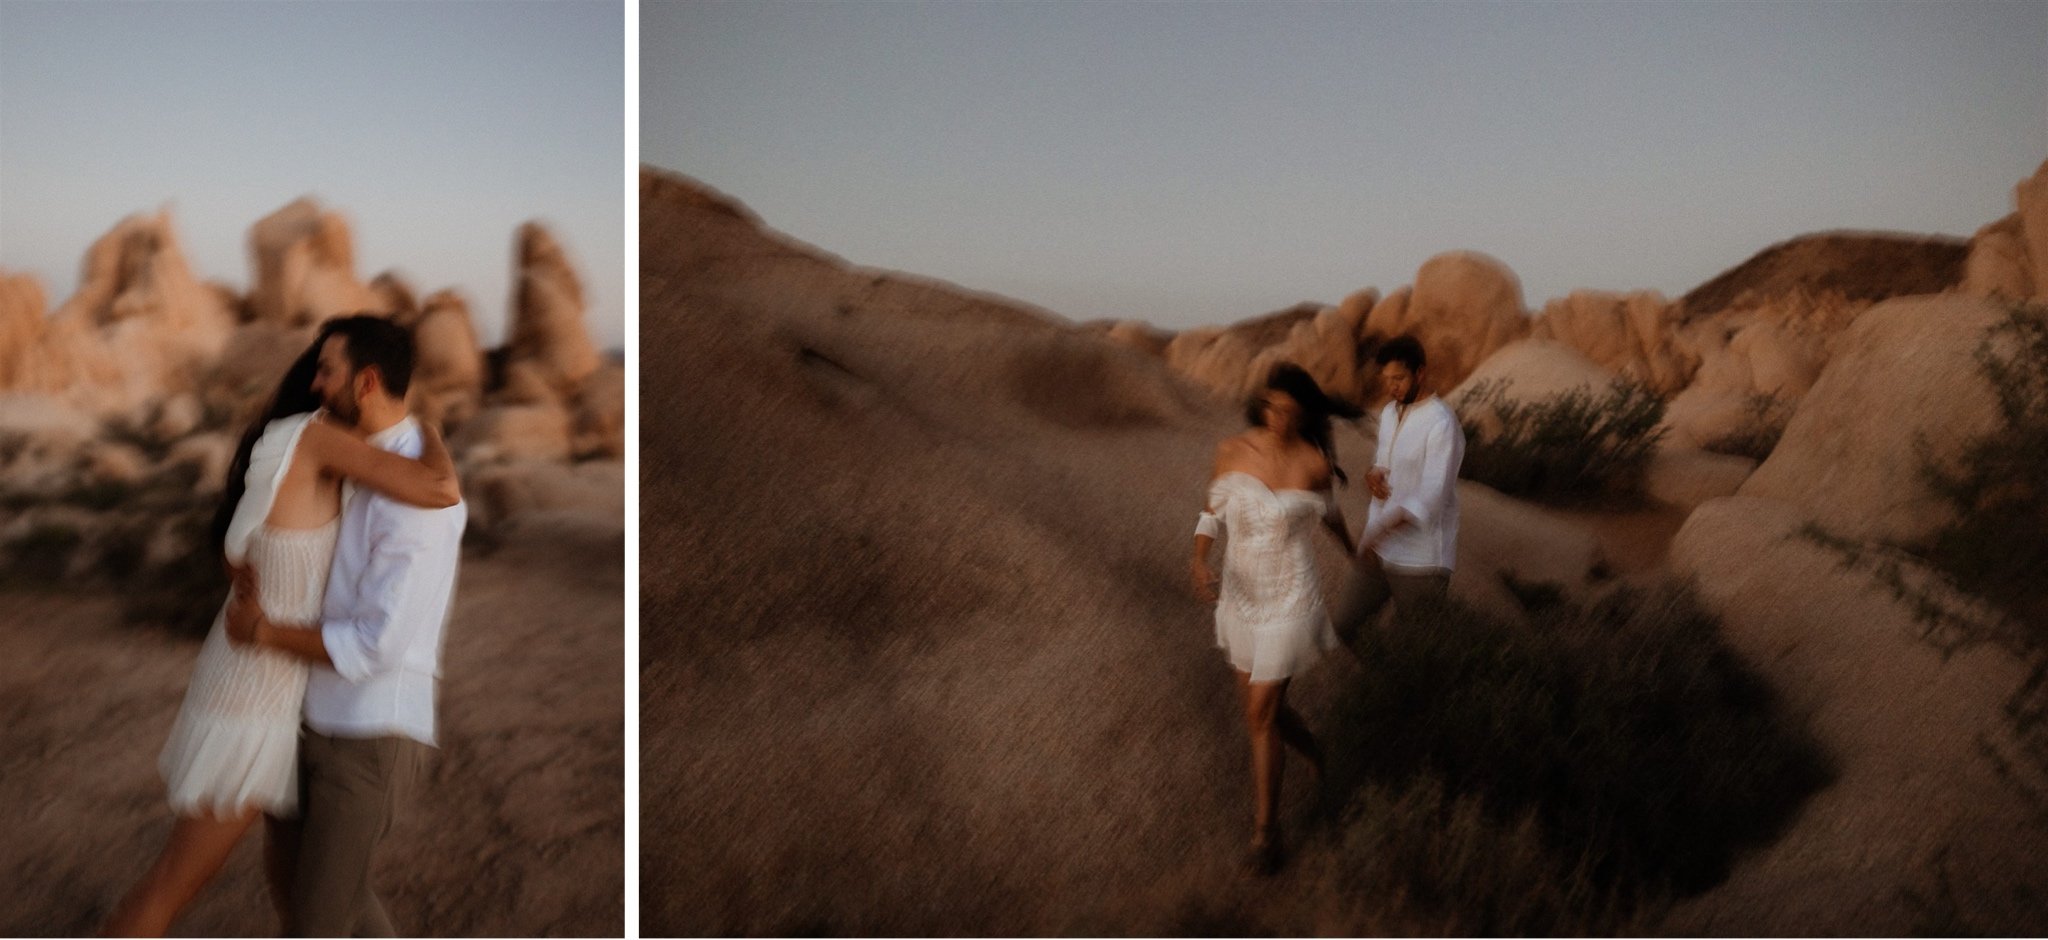 Joshua Tree Couples Session Surprise Proposal - Will Khoury Photography_54.jpg